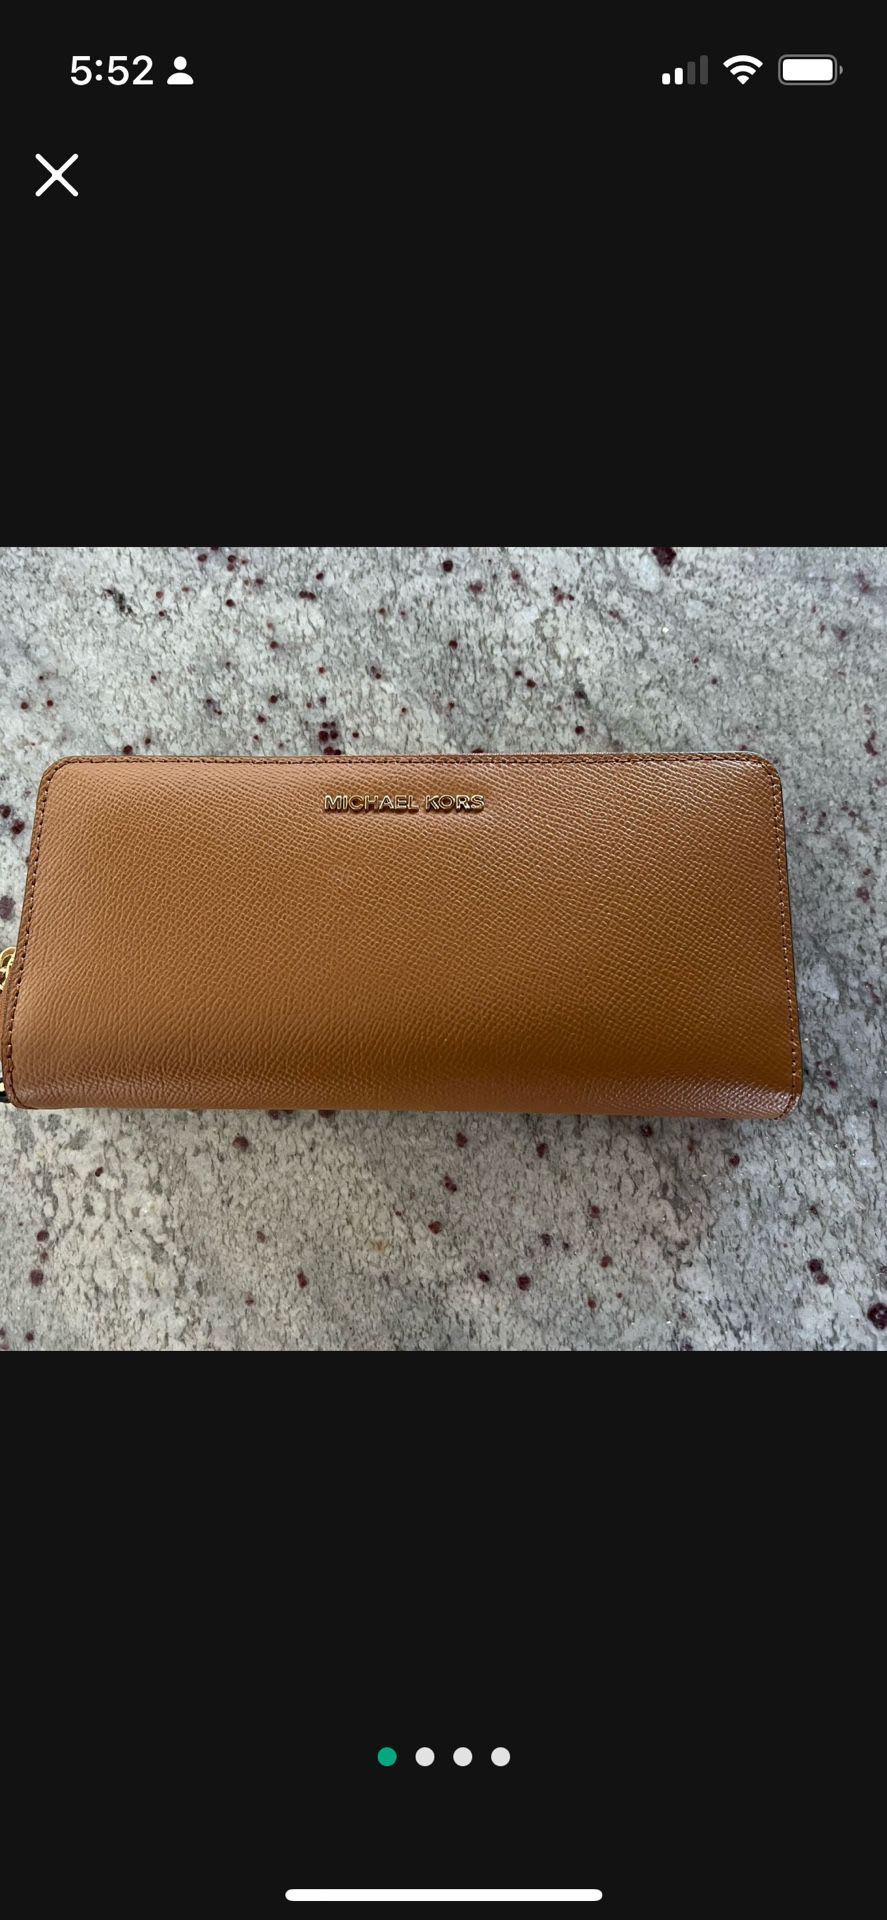  NEW Michael Kors Jet Set Travel Continental  Wallet- Macys -$ 178 Yours For $75